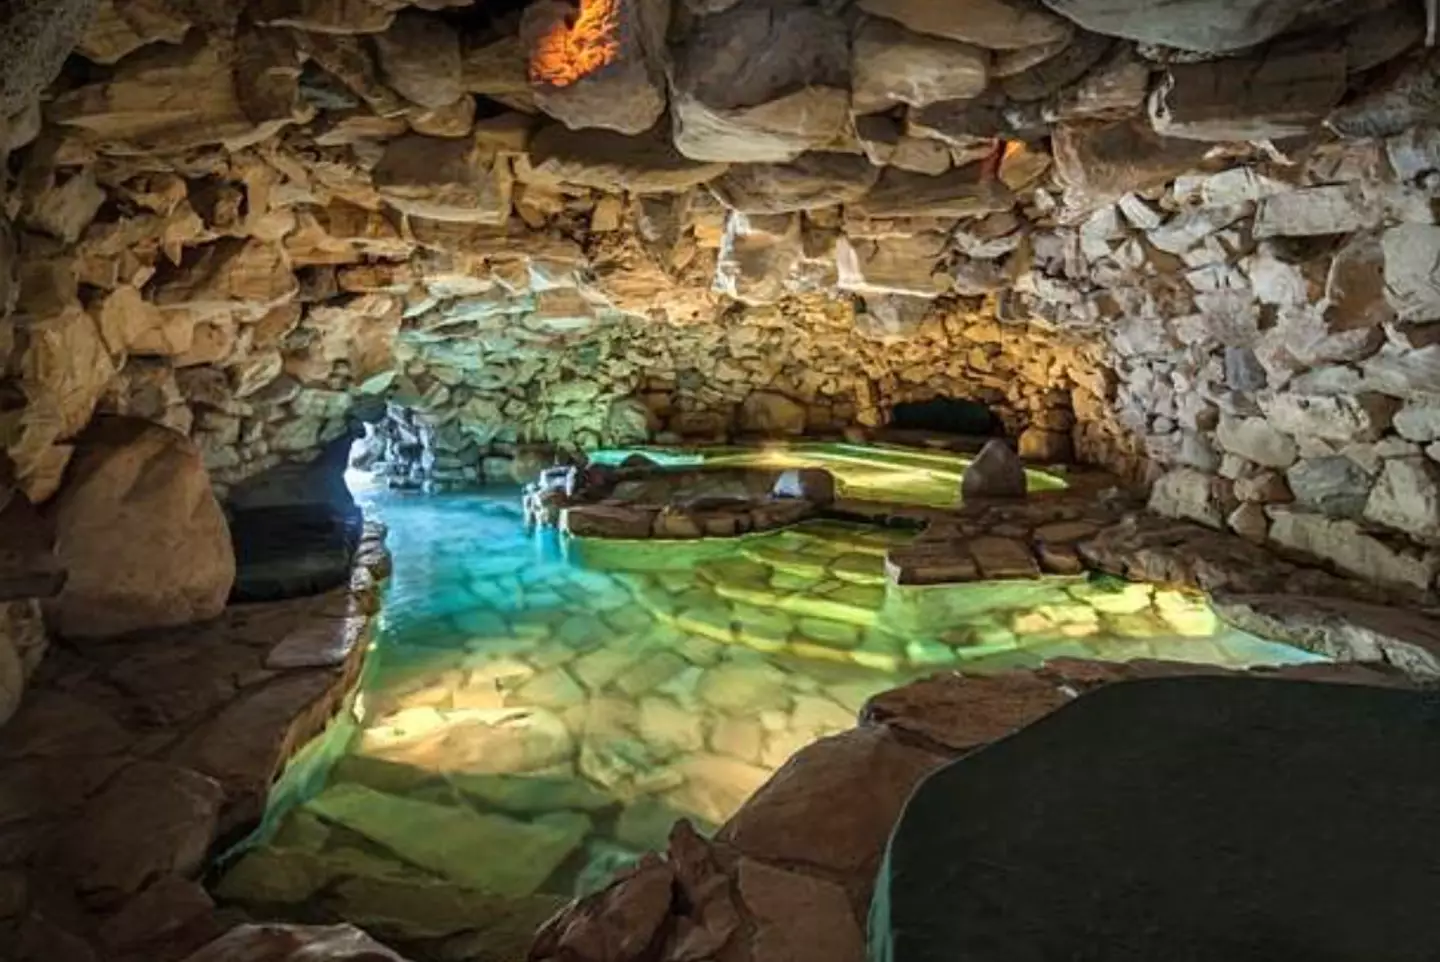 The famed Playboy grotto.